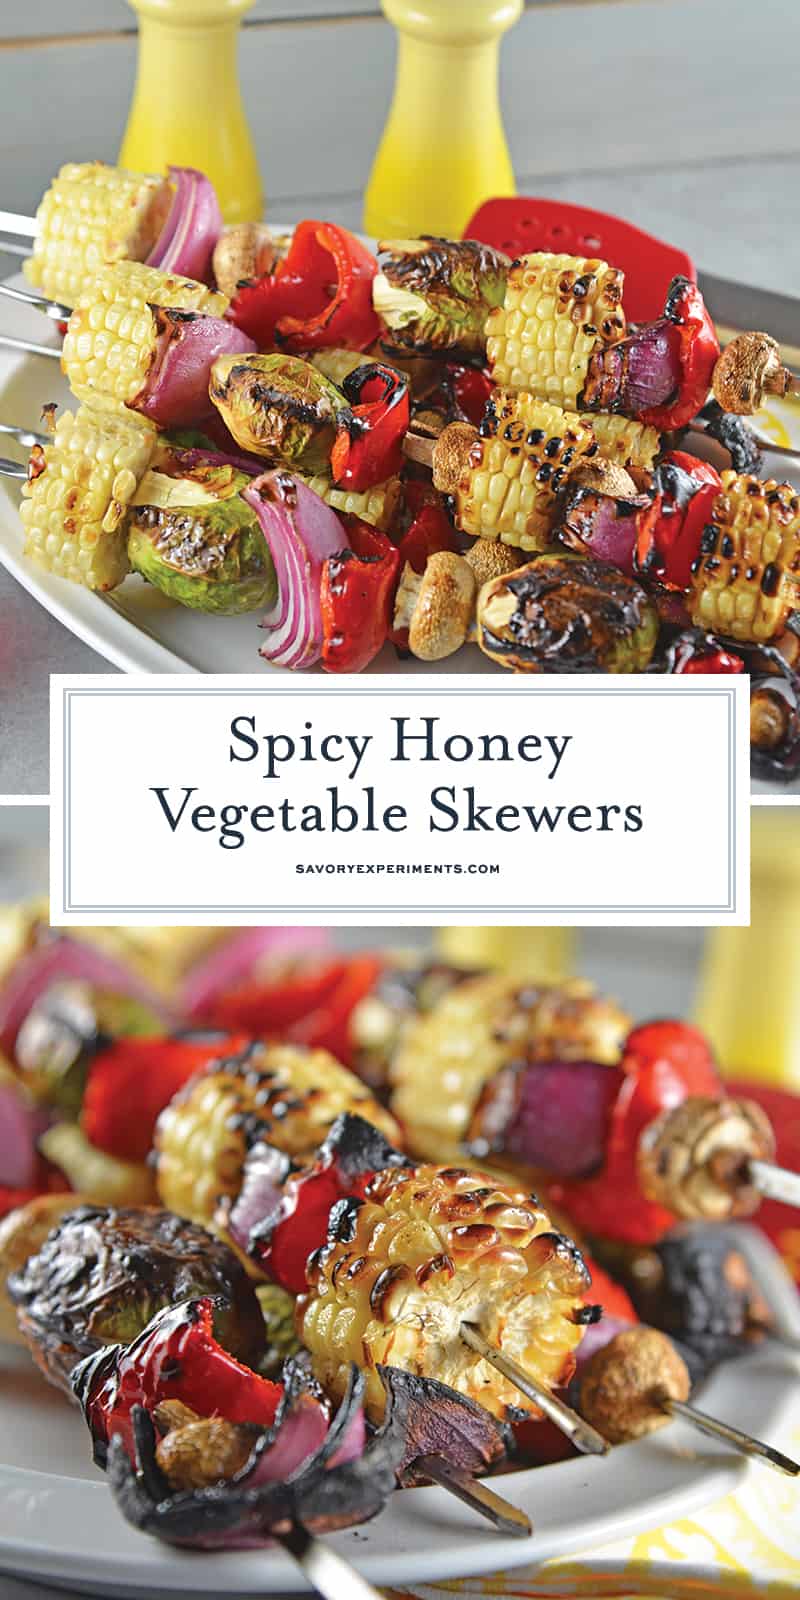 Spicy Honey Vegetable Kabobs are brightly colored skewered grilled vegetables with a sweet and spicy sauce. The perfect side dish for any grilled meal! #vegetablekabobs #grilledvegetables www.savoryexperiments.com